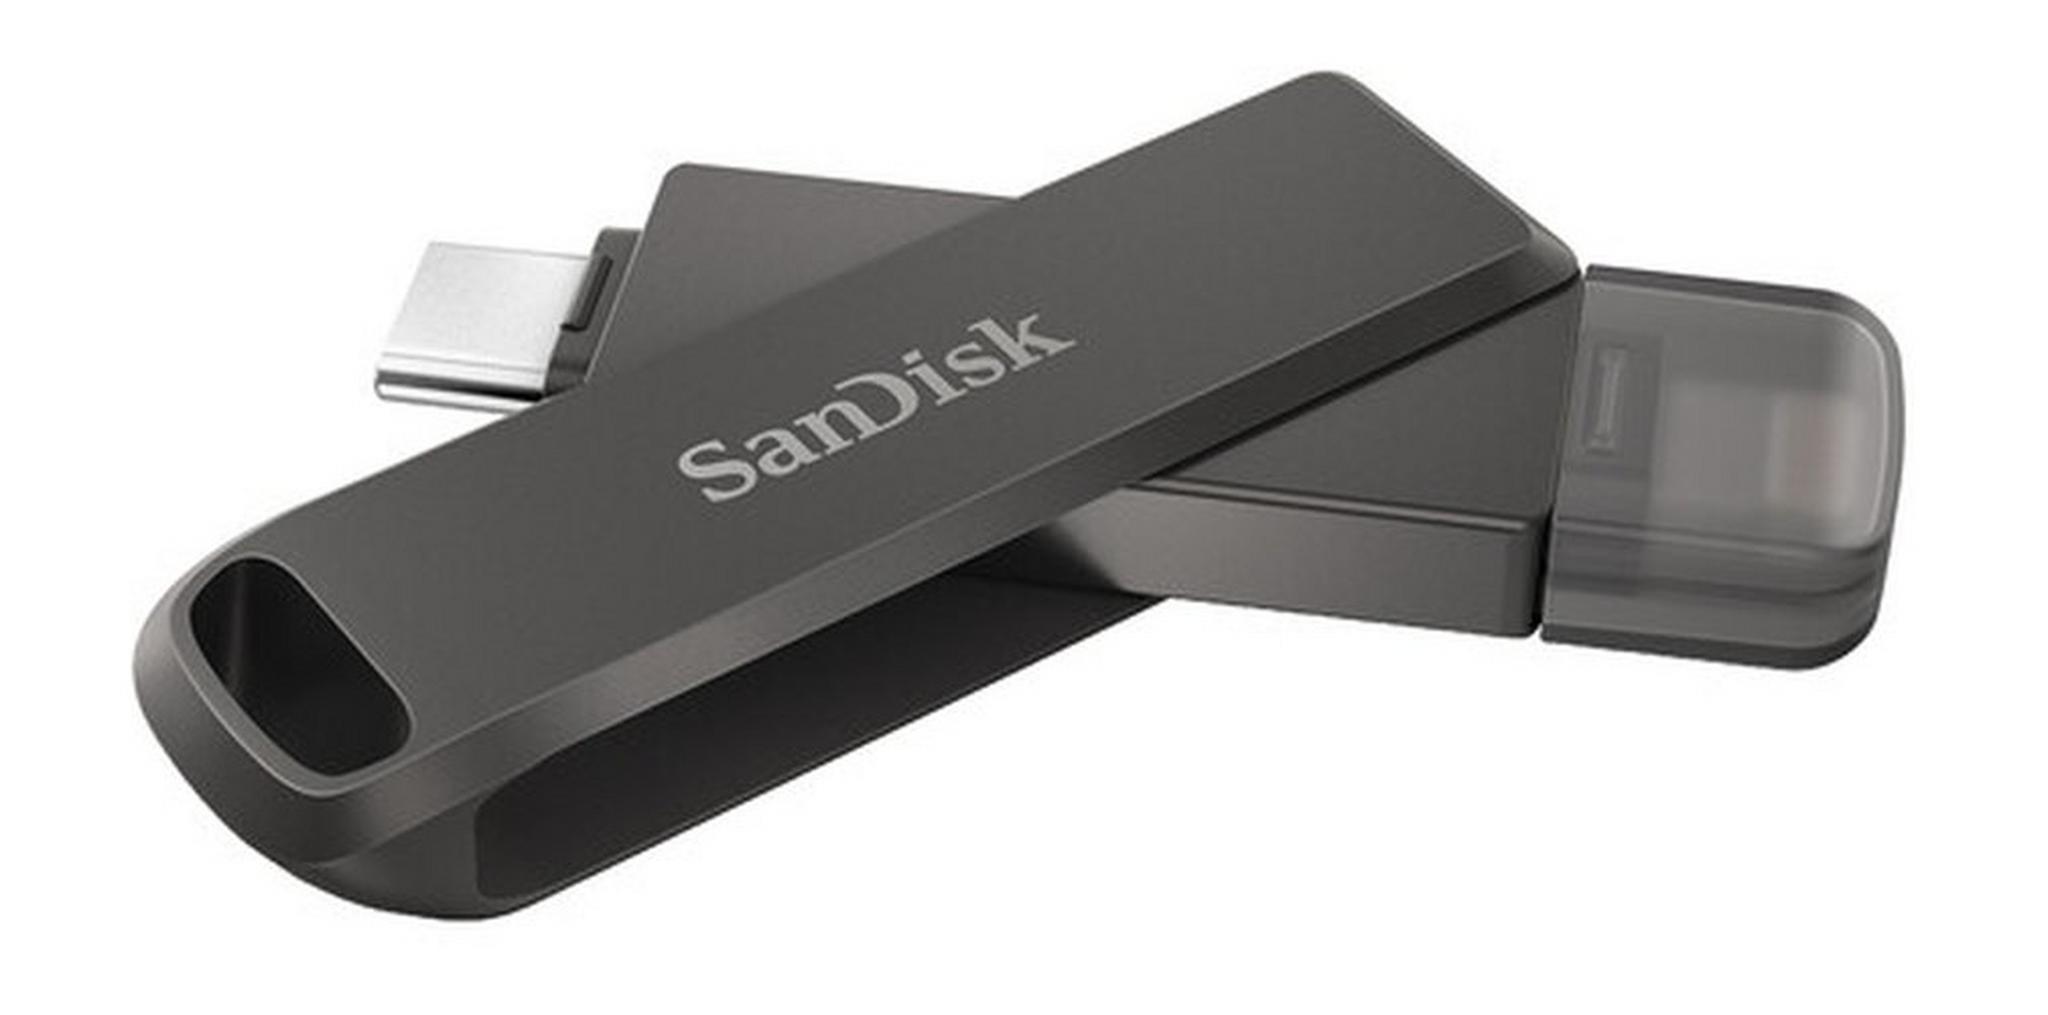 SanDisk 64GB iXpand Flash Drive Luxe